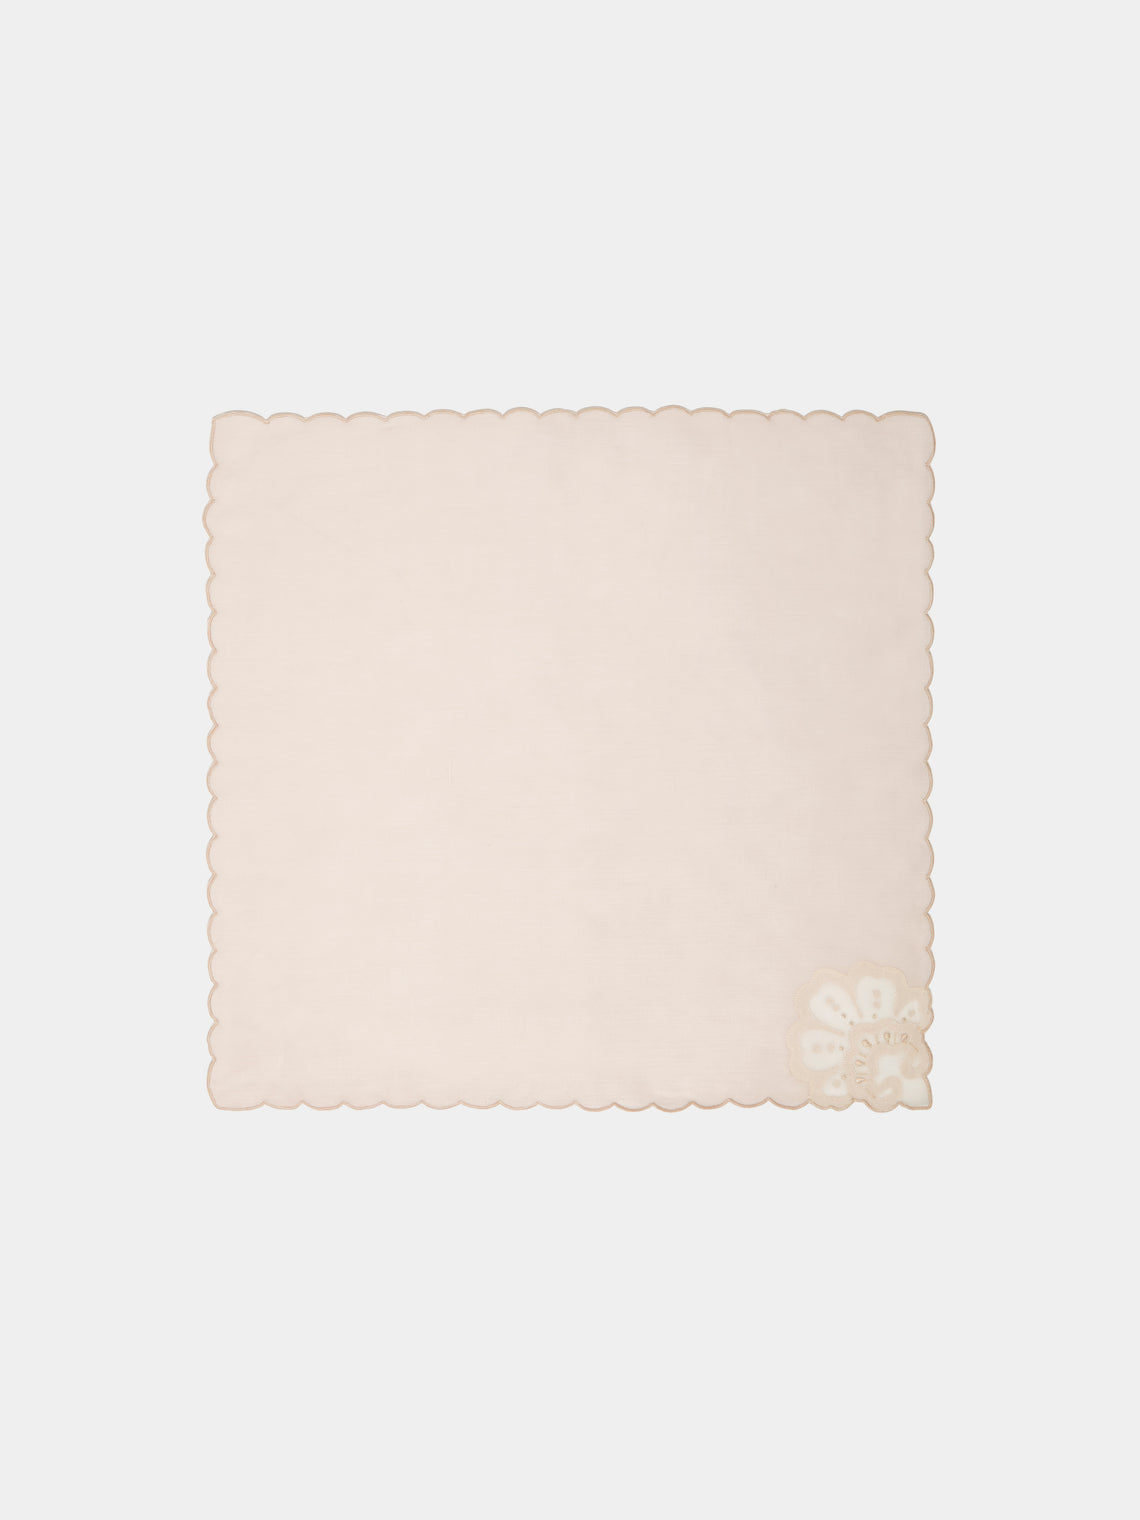 Taf Firenze - Conchiglie Hand-Embroidered Linen Placemats and Napkins (Set of 6) - Light Pink - ABASK